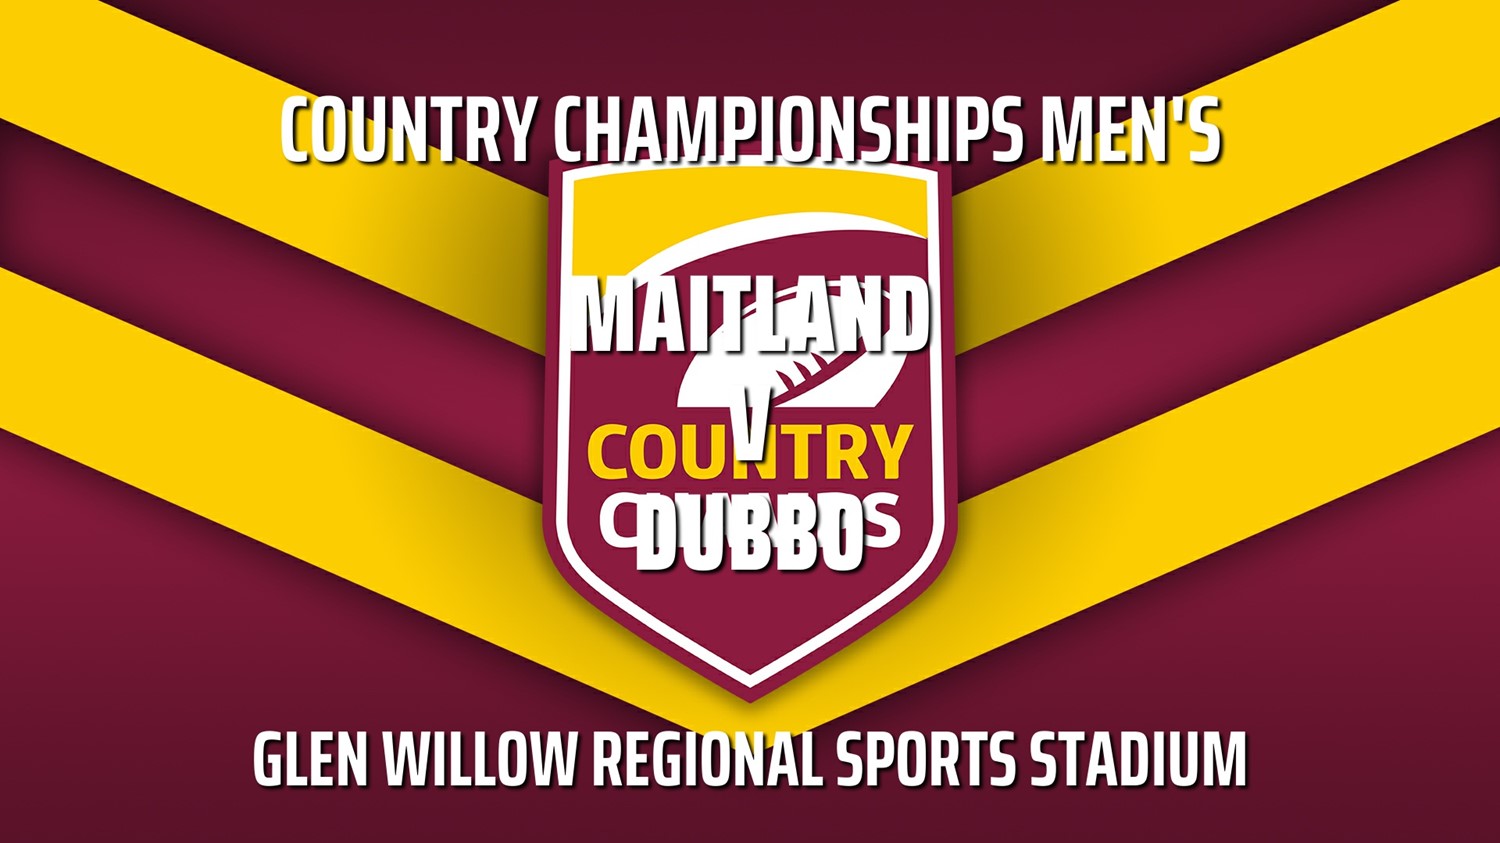 231014-Country Championships Men's  - Maitland Redbacks touch v Dubbo Touch Football Minigame Slate Image